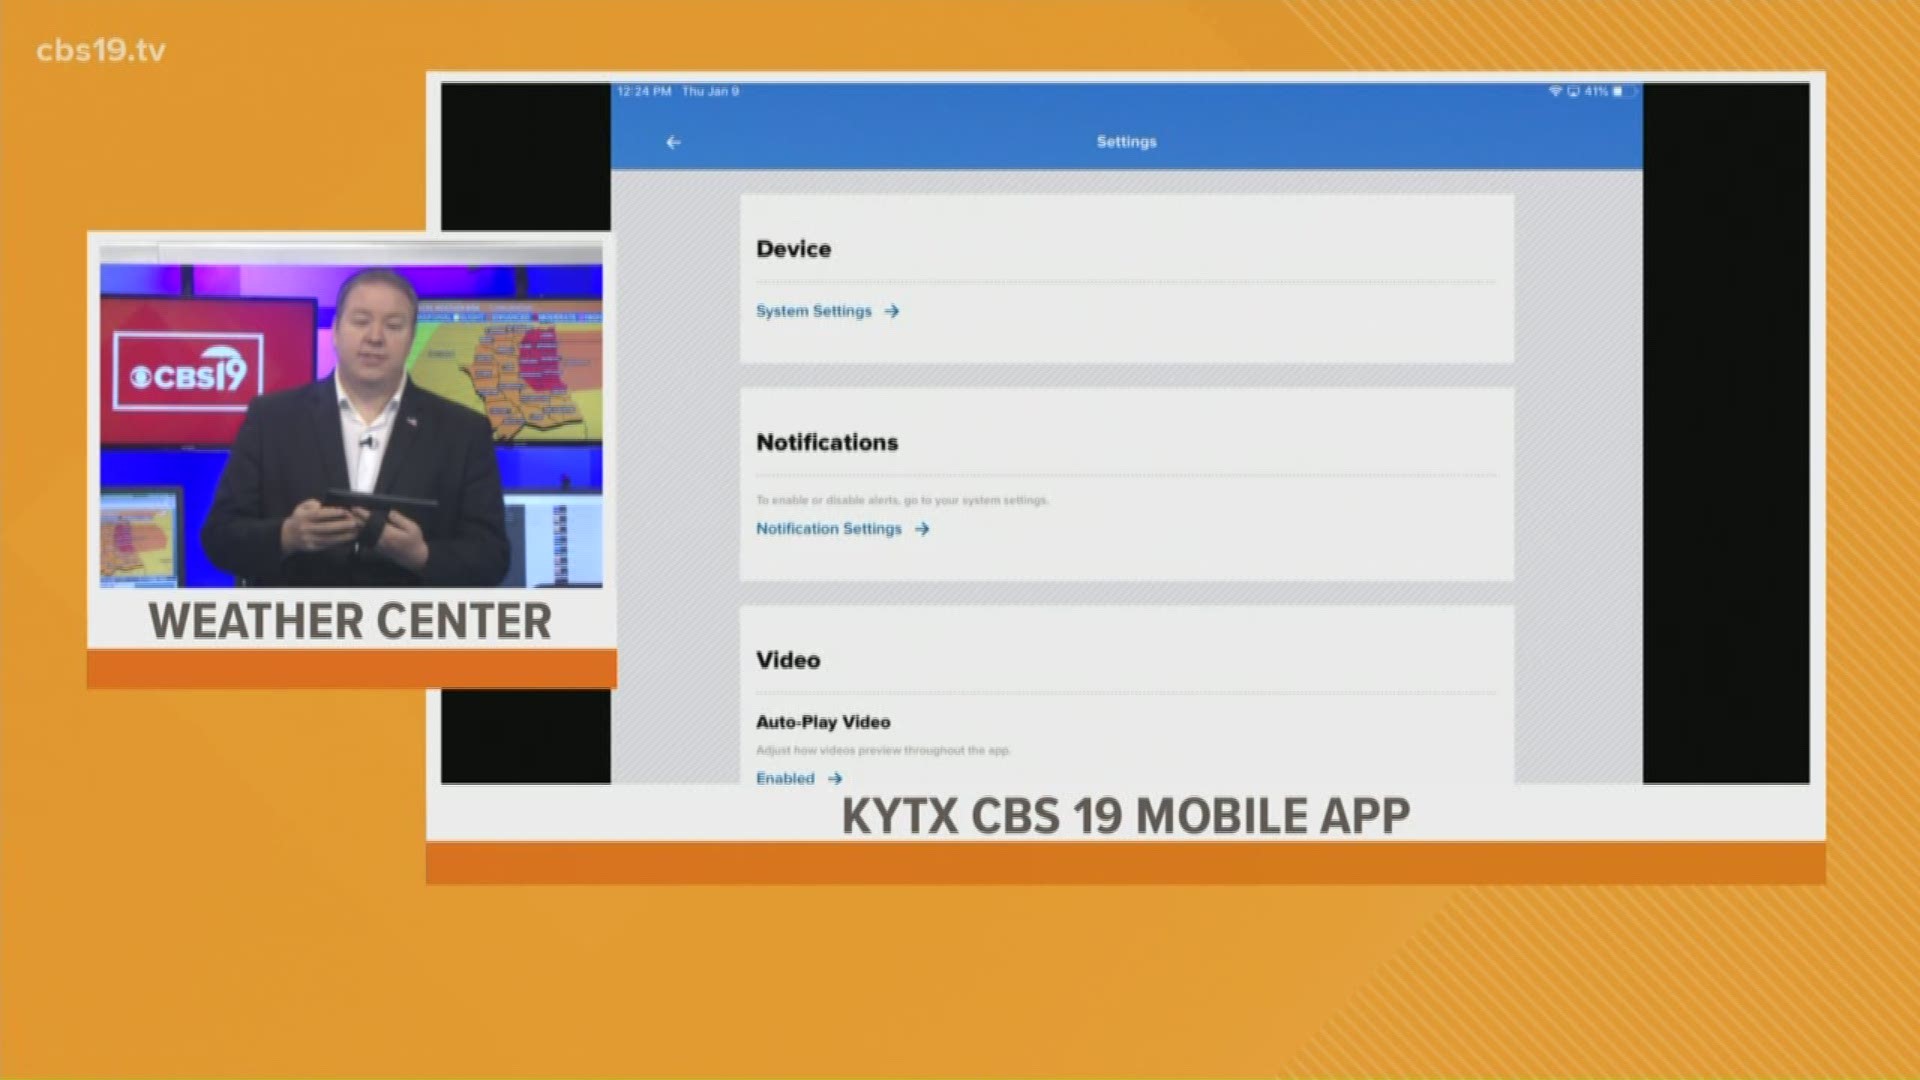 With severe weather in the forecast, Meteorologist Michael Behrens walks you through setting up weather alerts on your KYTX CBS 19 Mobile App!